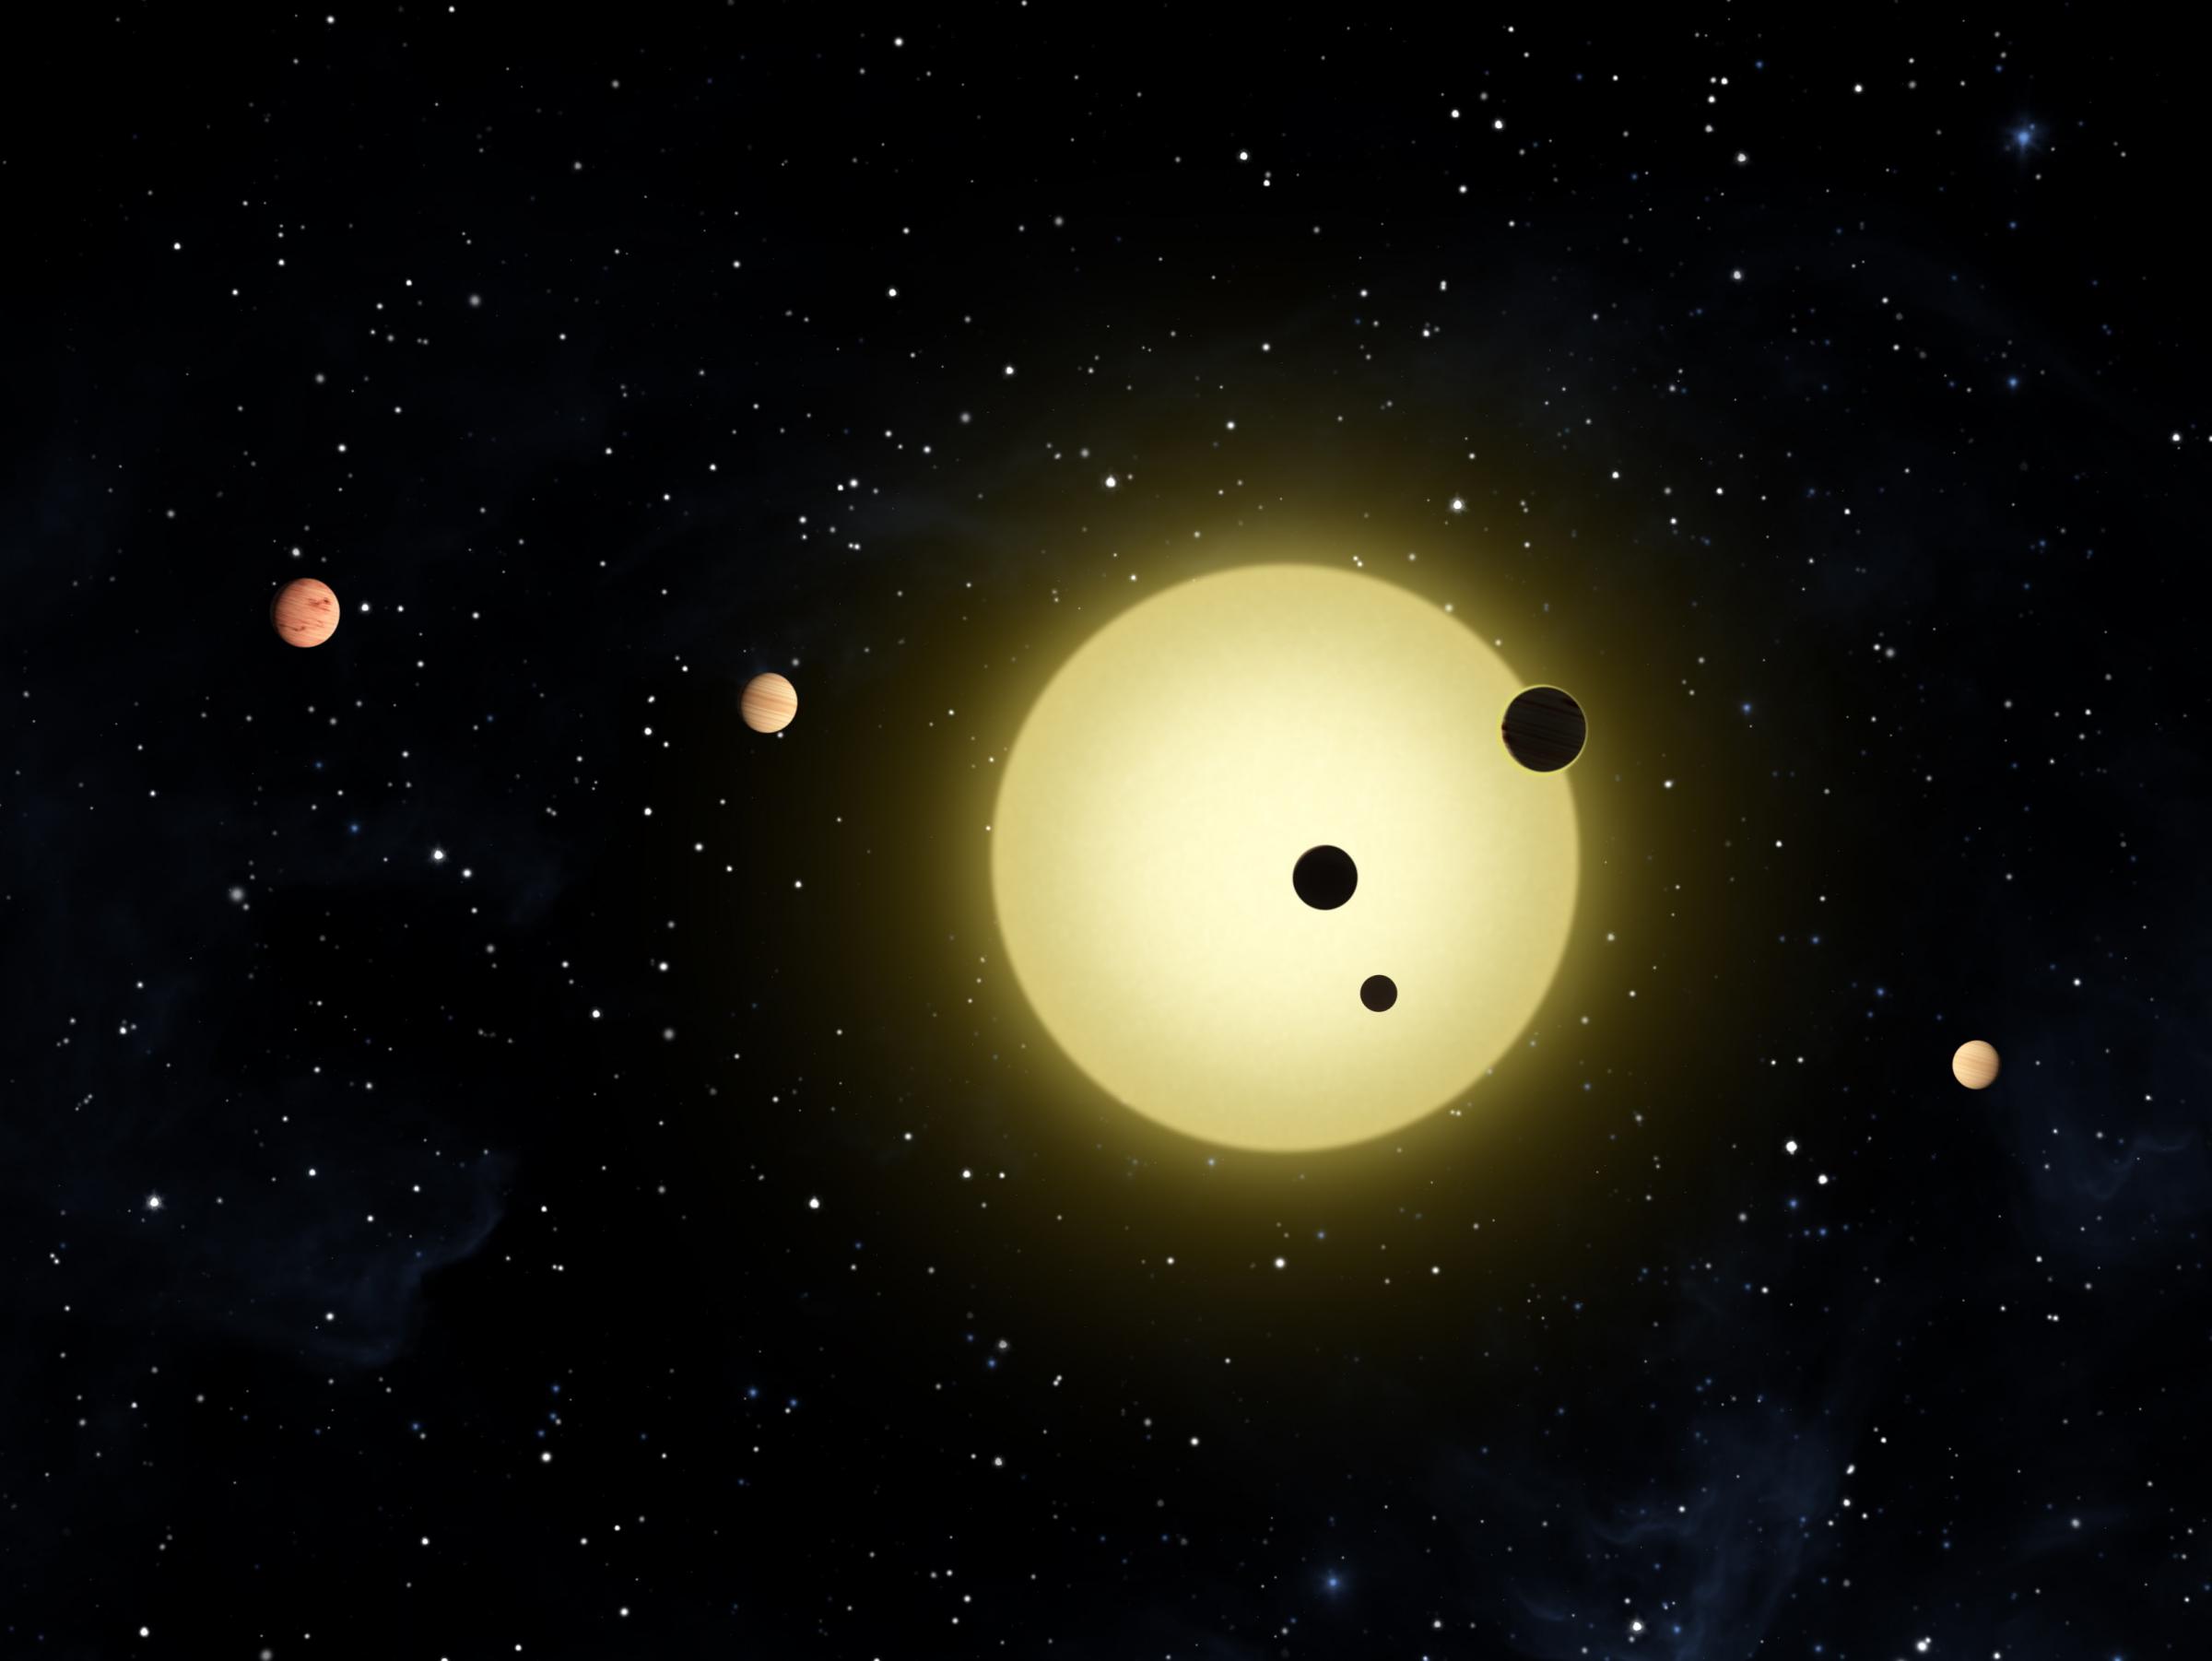 number exoplanets discovered 1995 nasa